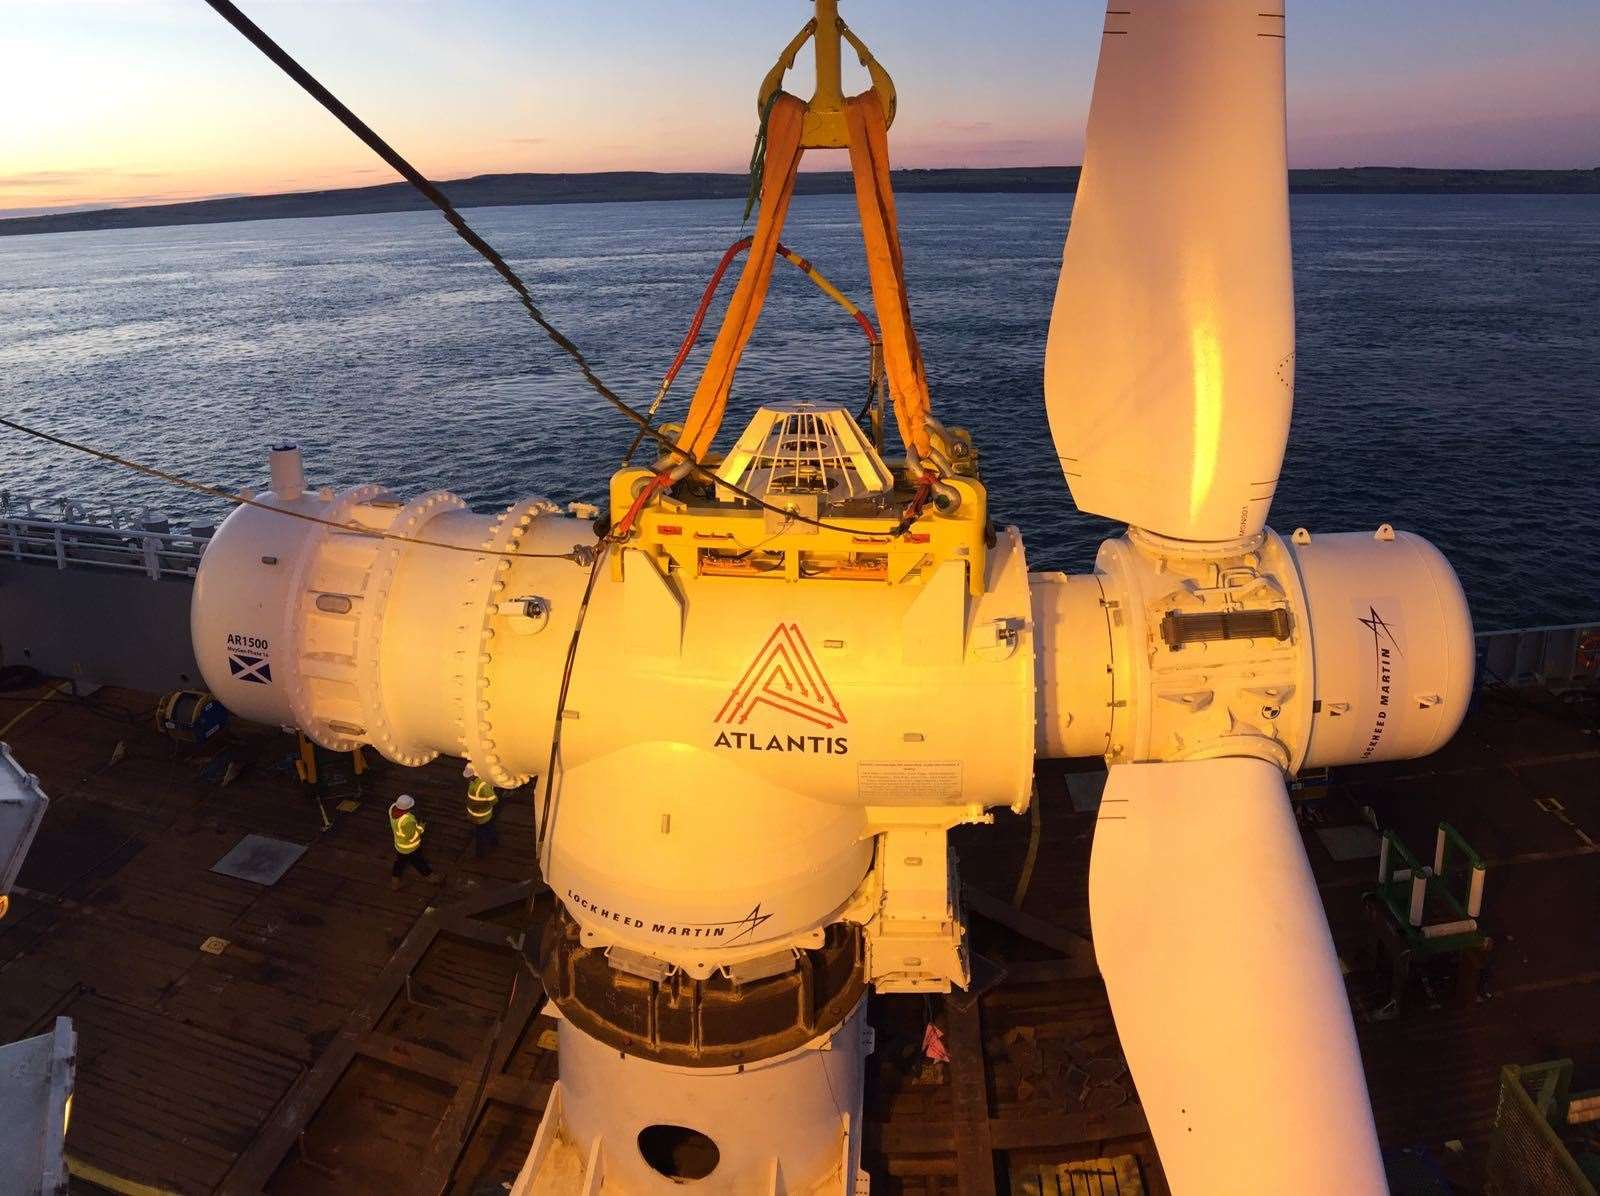 The turbine installed off the coast of China is based on this Atlantis device, in operation in the Pentland Firth.